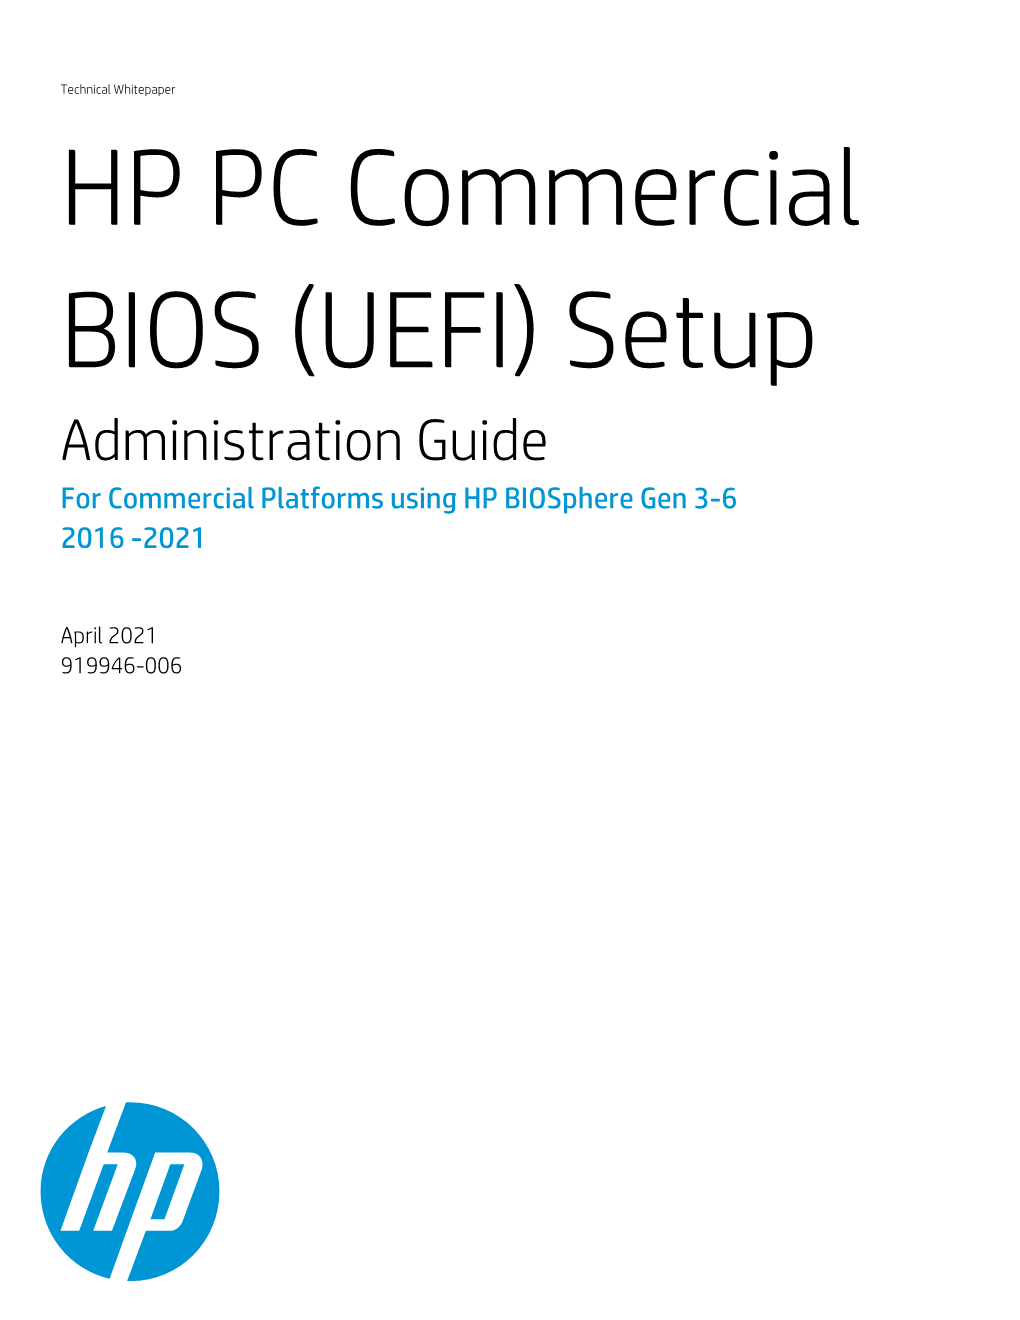 HP PC Commercial BIOS (UEFI) Setup Administration Guide for Commercial Platforms Using HP Biosphere Gen 3-6 2016 -2021